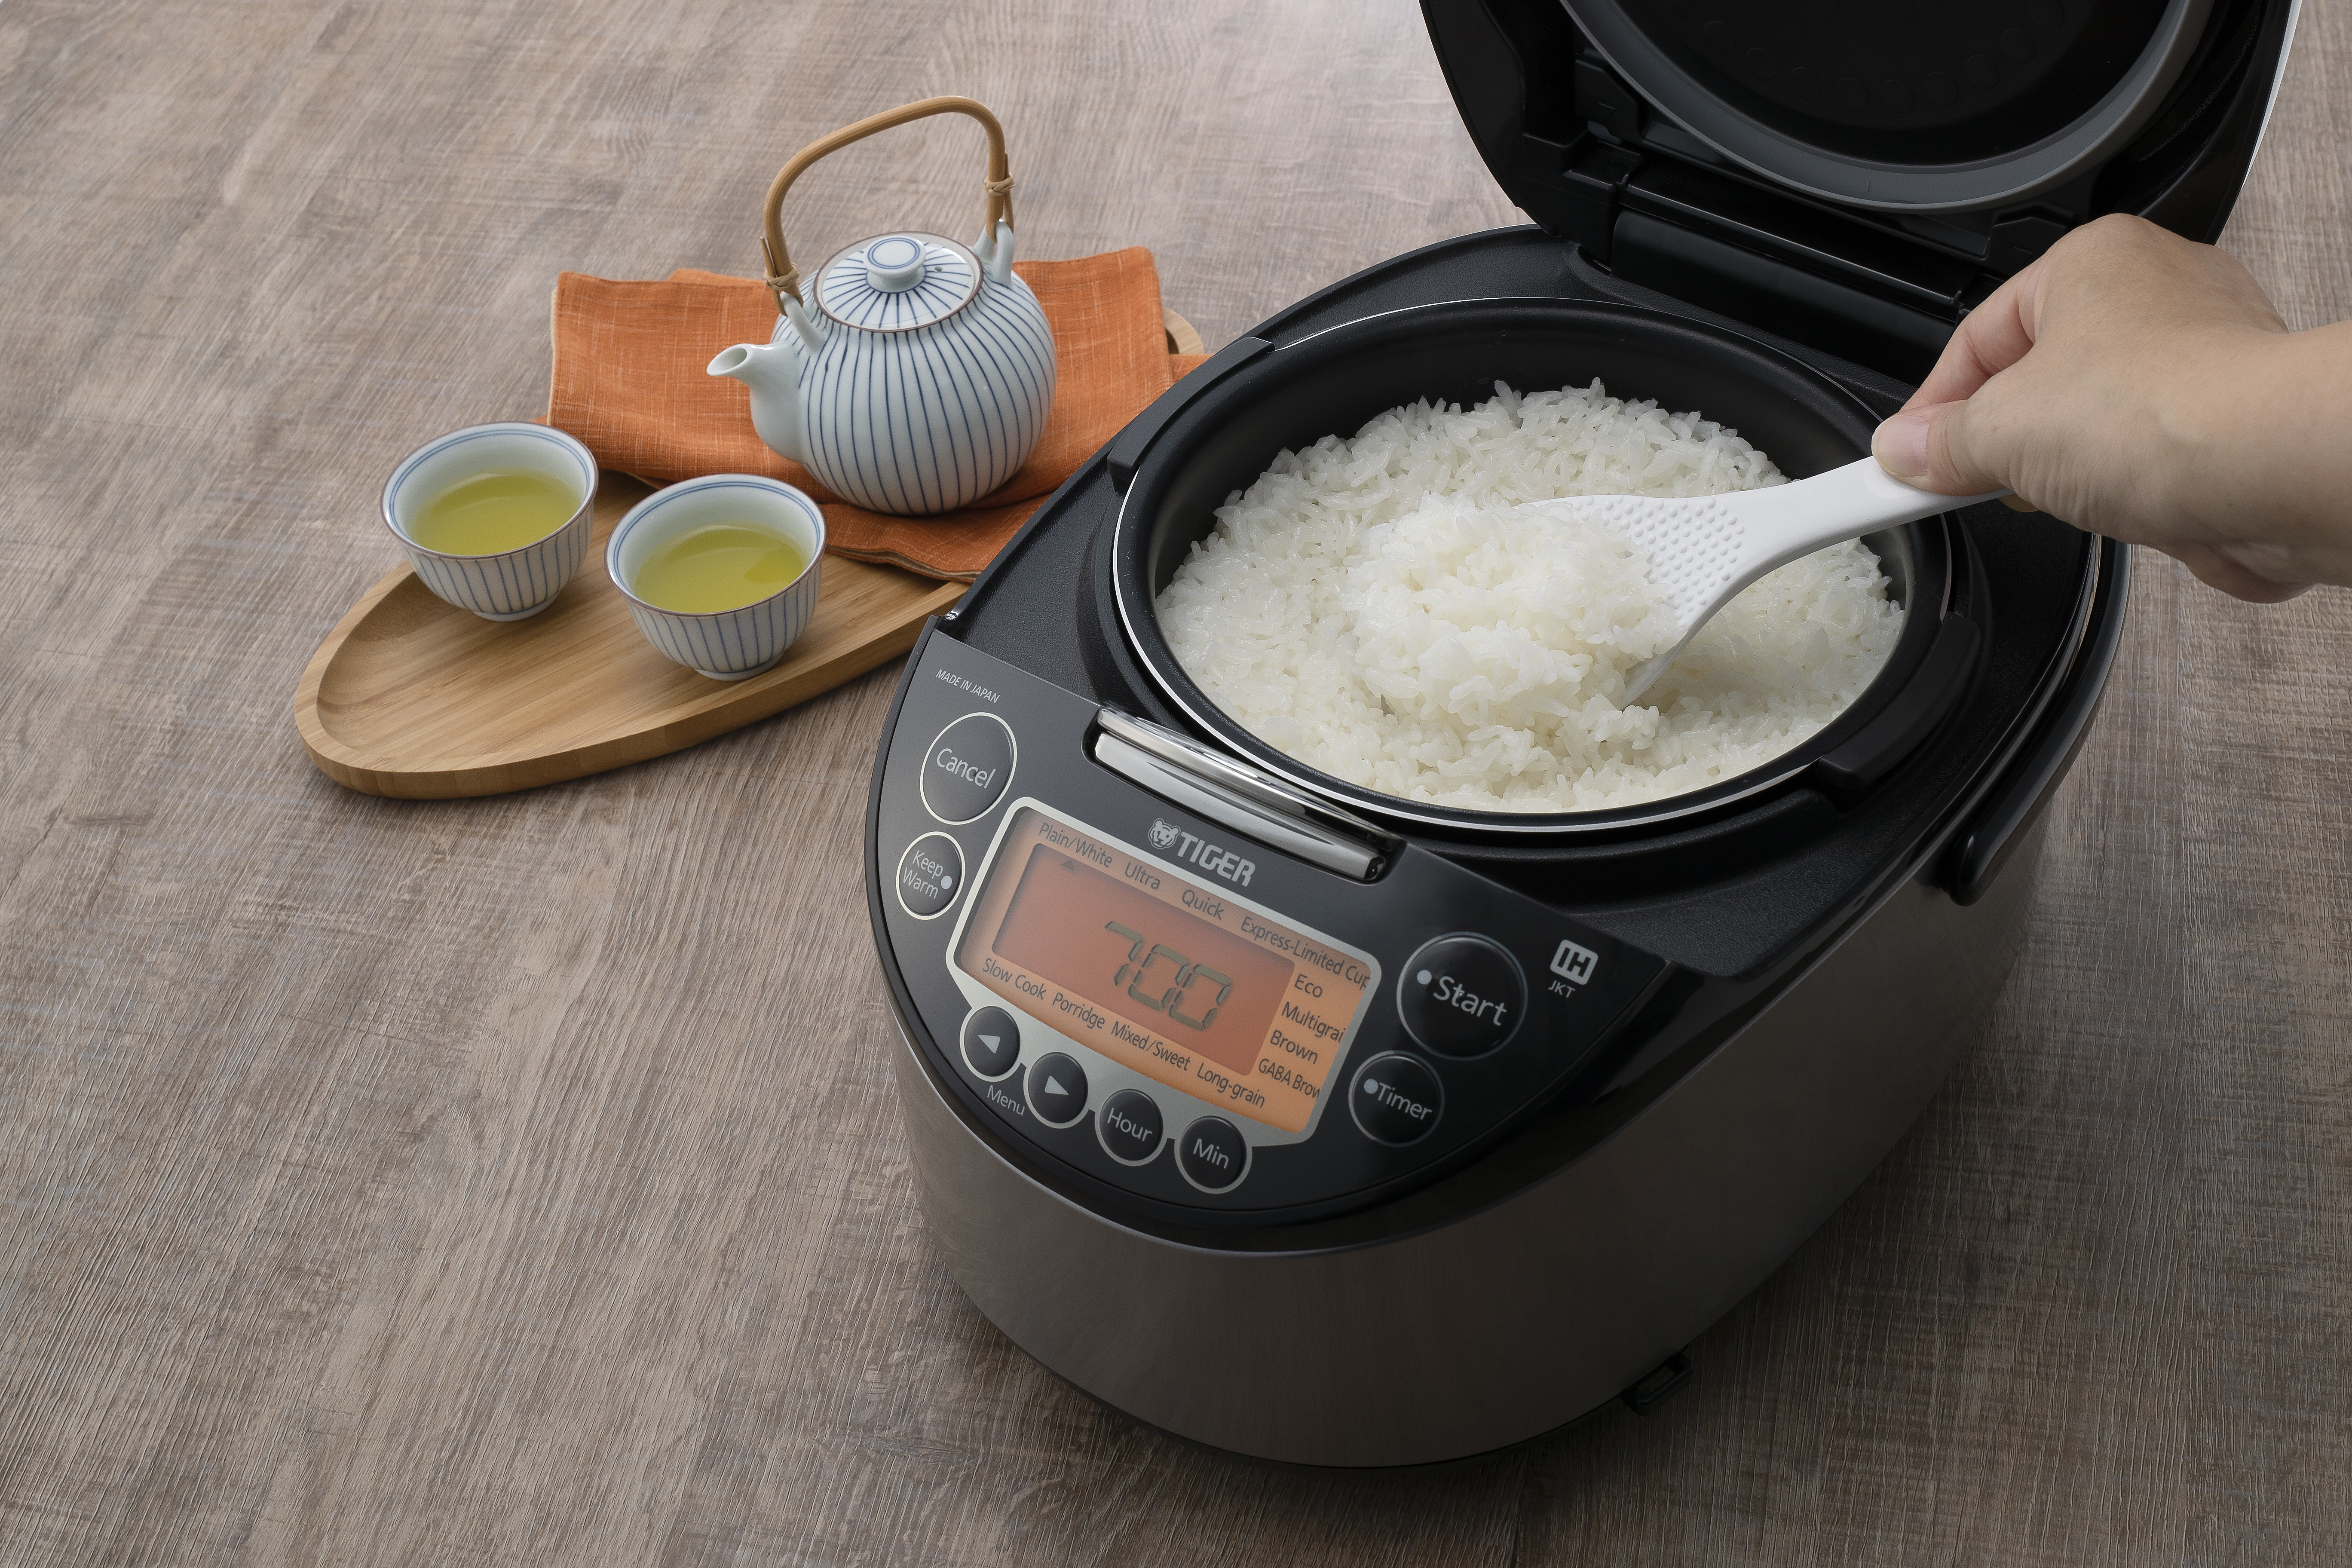 made-in-japan-induction-heating-rice-cooker-jkt-d-express-limited-cups.jpg (15.52 MB)